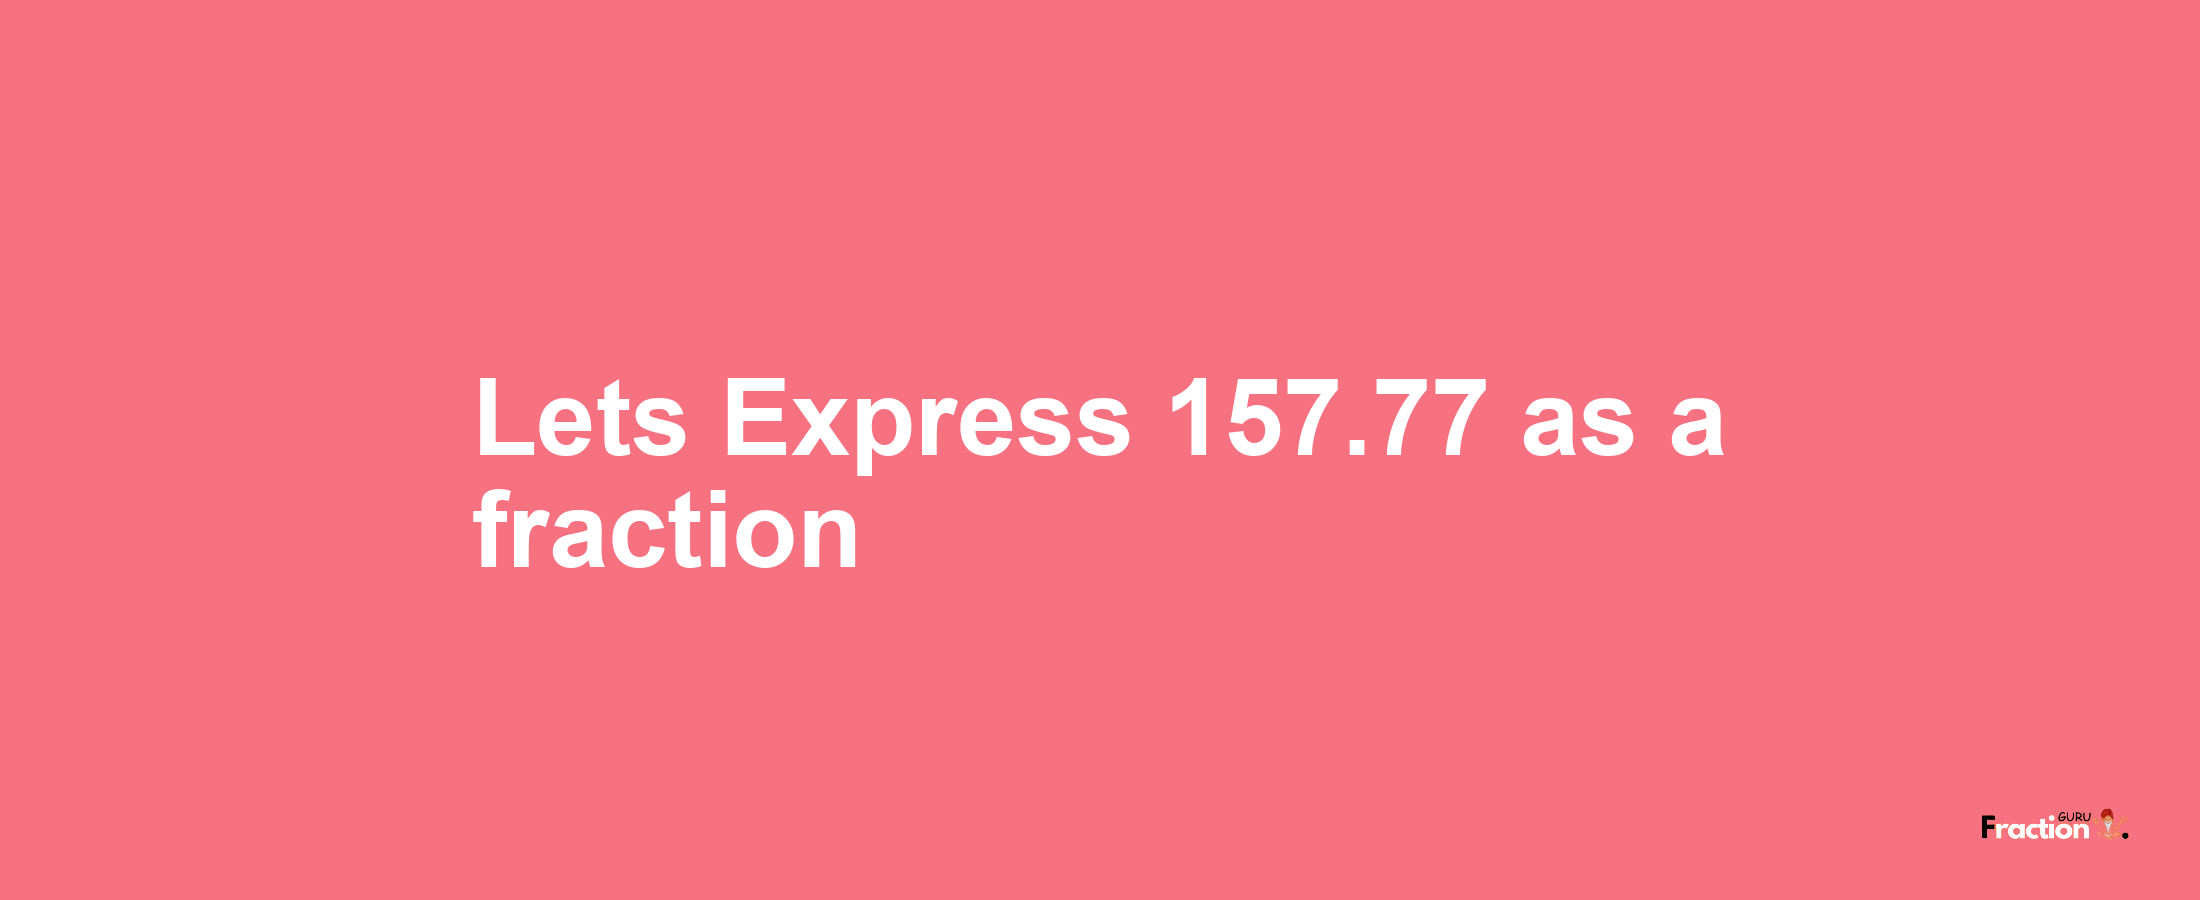 Lets Express 157.77 as afraction